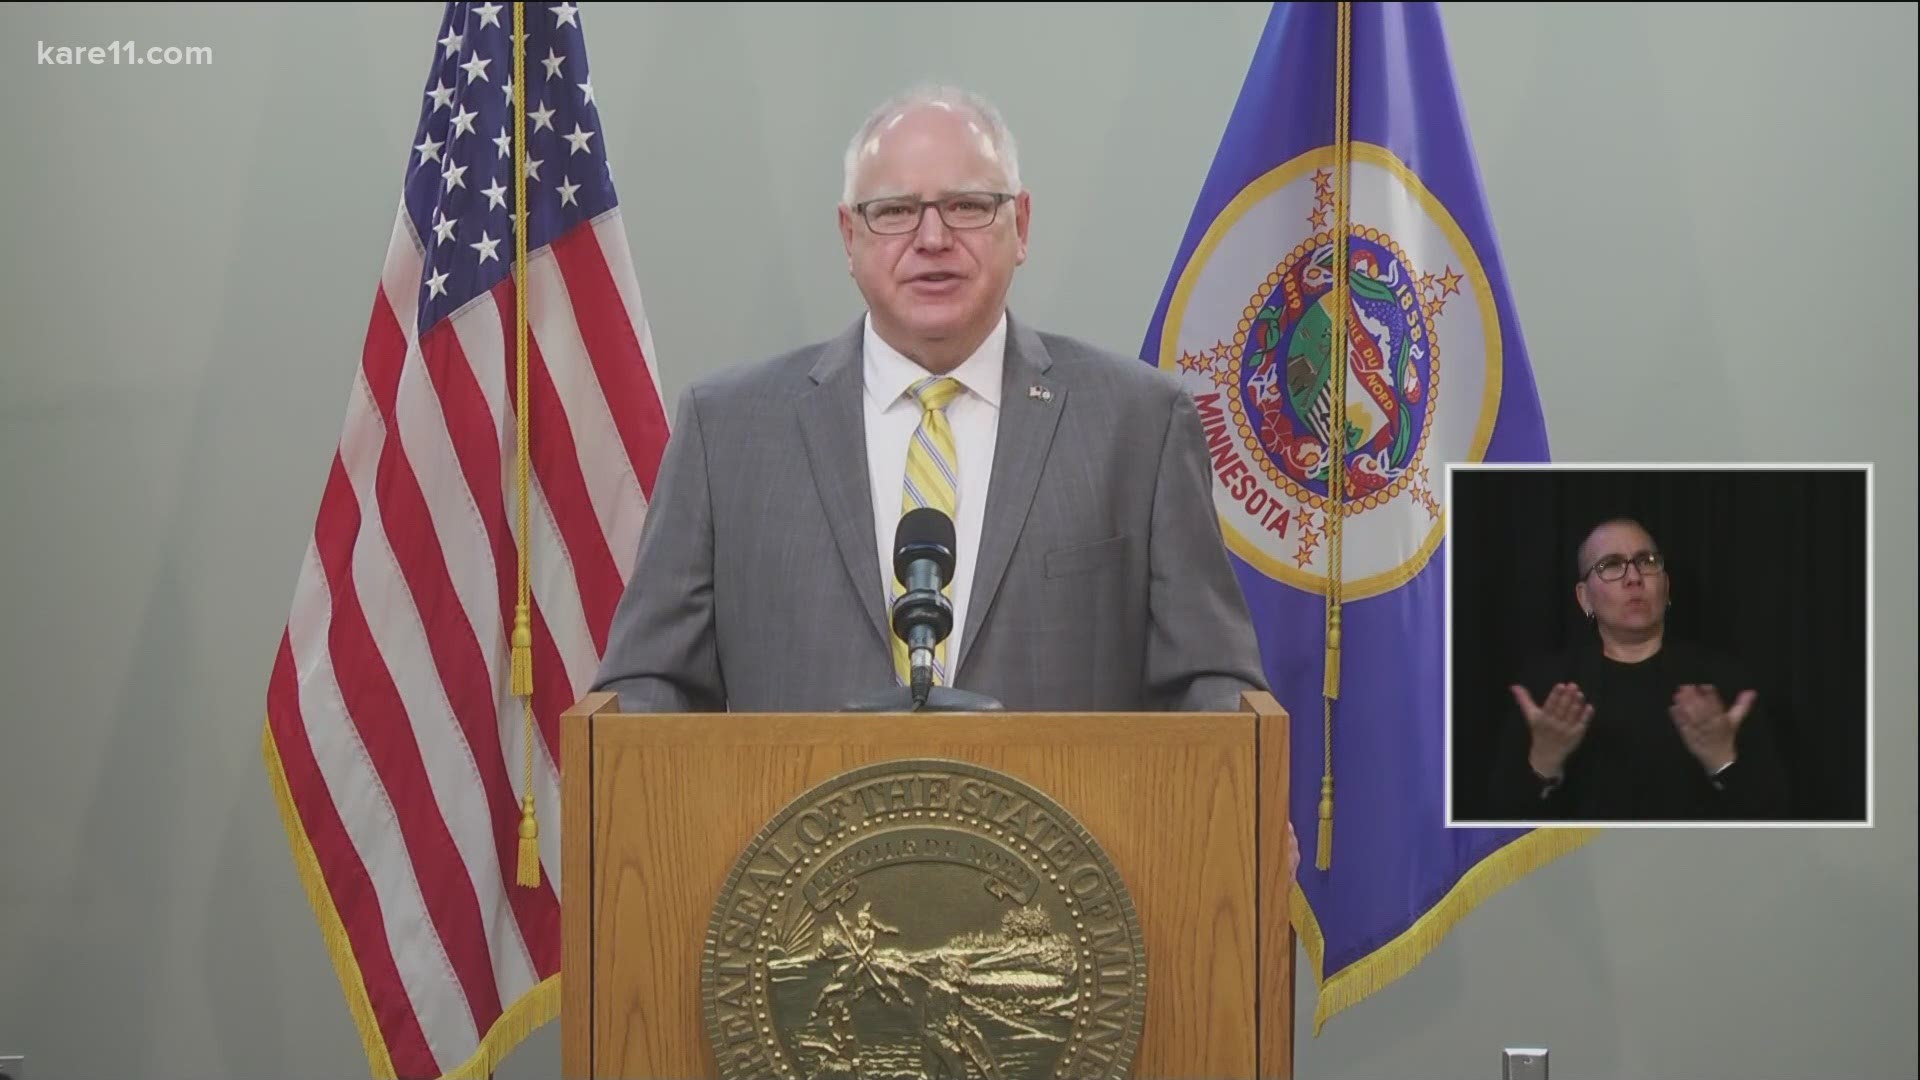 Governor Tim Walz announced he's loosening COVID restrictions starting on May 7